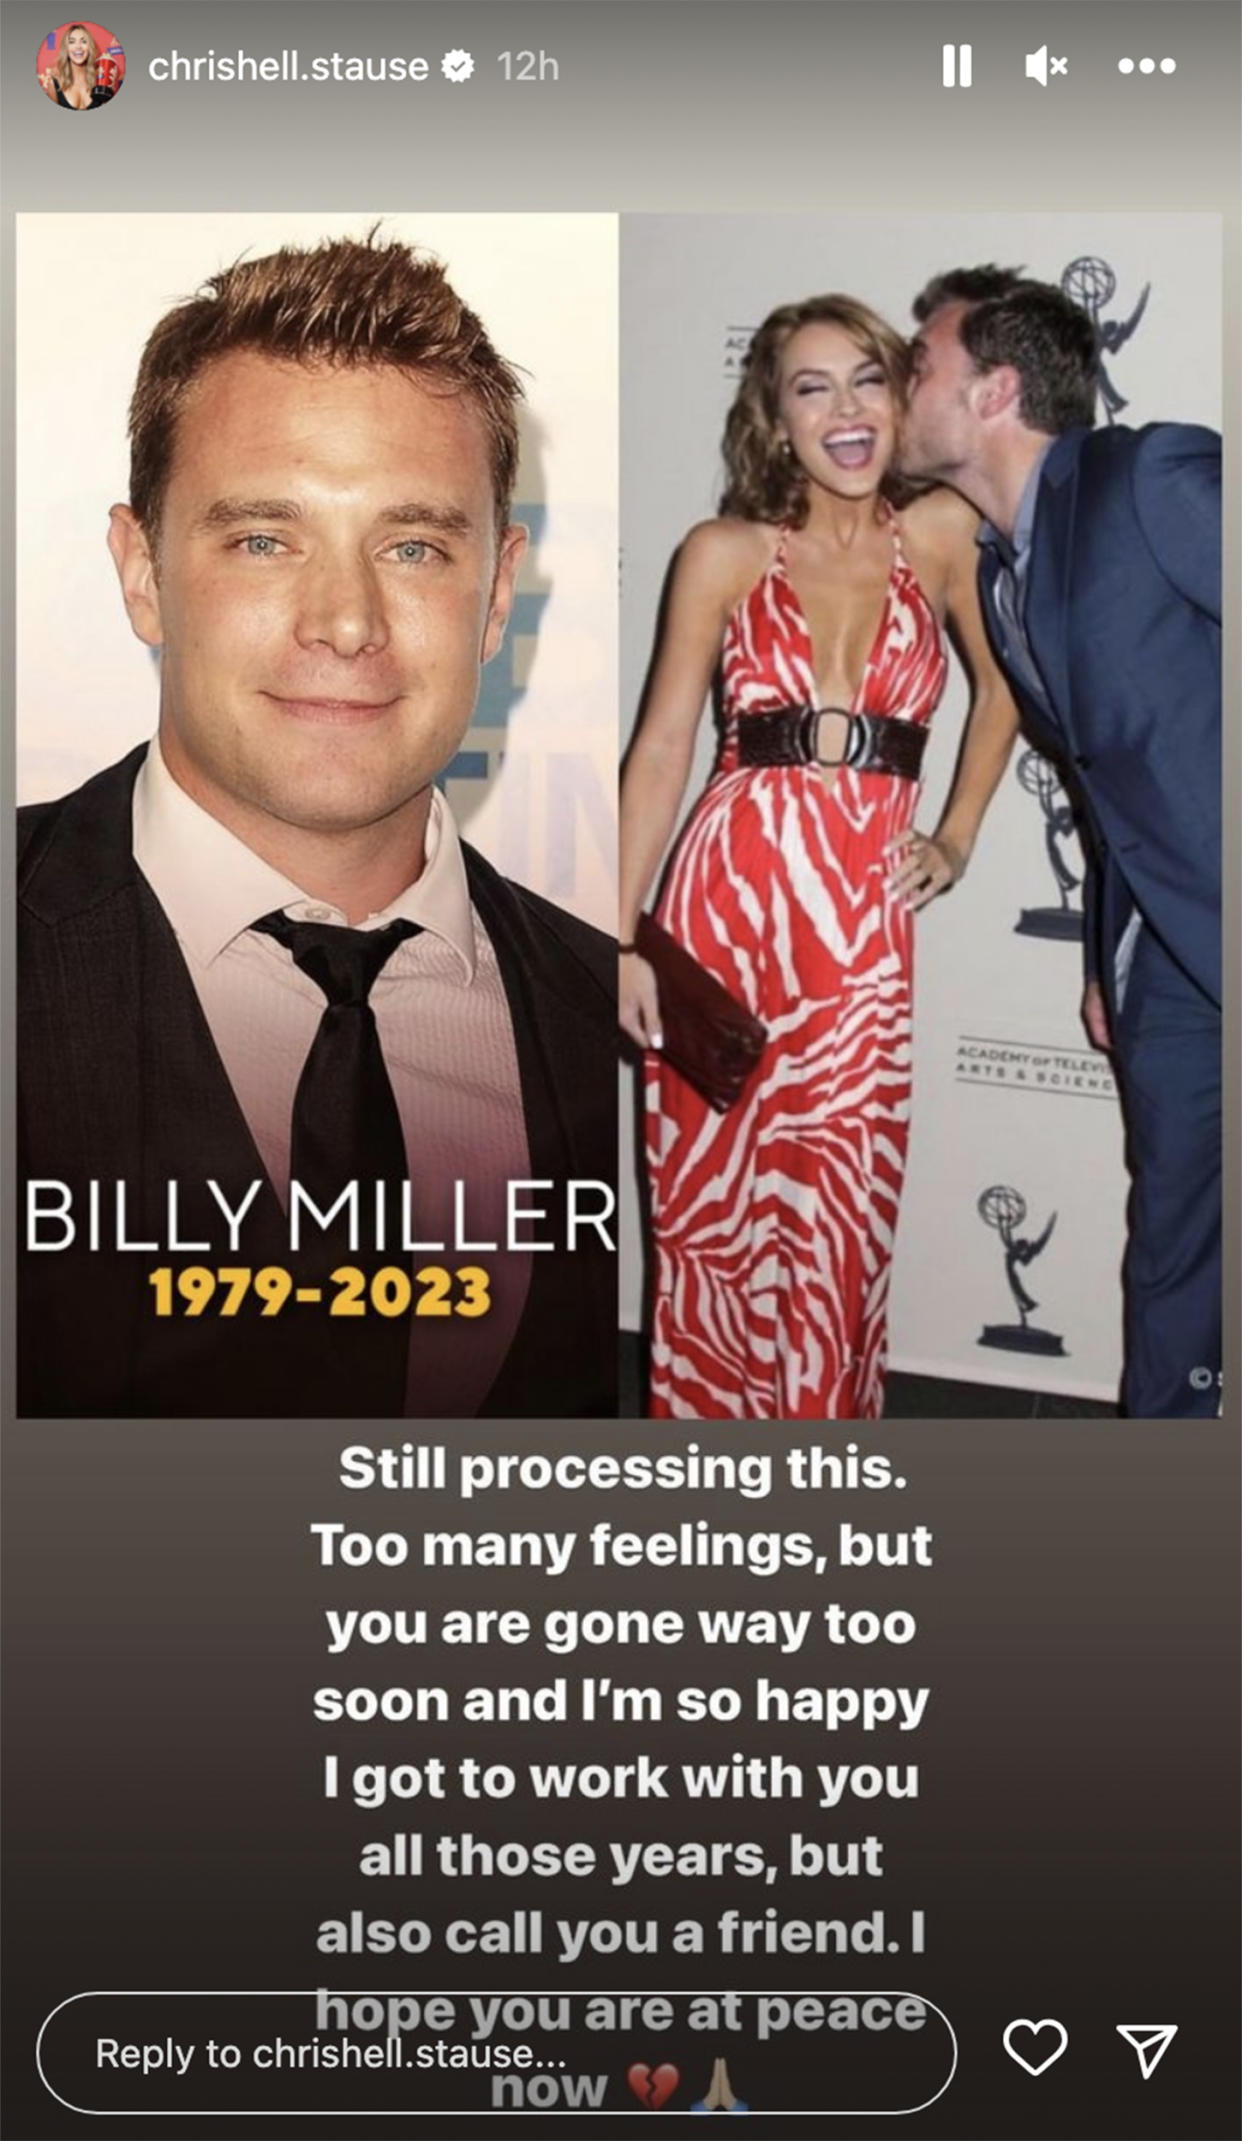 Chrishell Stause paid tribute to her personal and professional relationship with Billy Miller. (@chrishell.stause via Instagram)